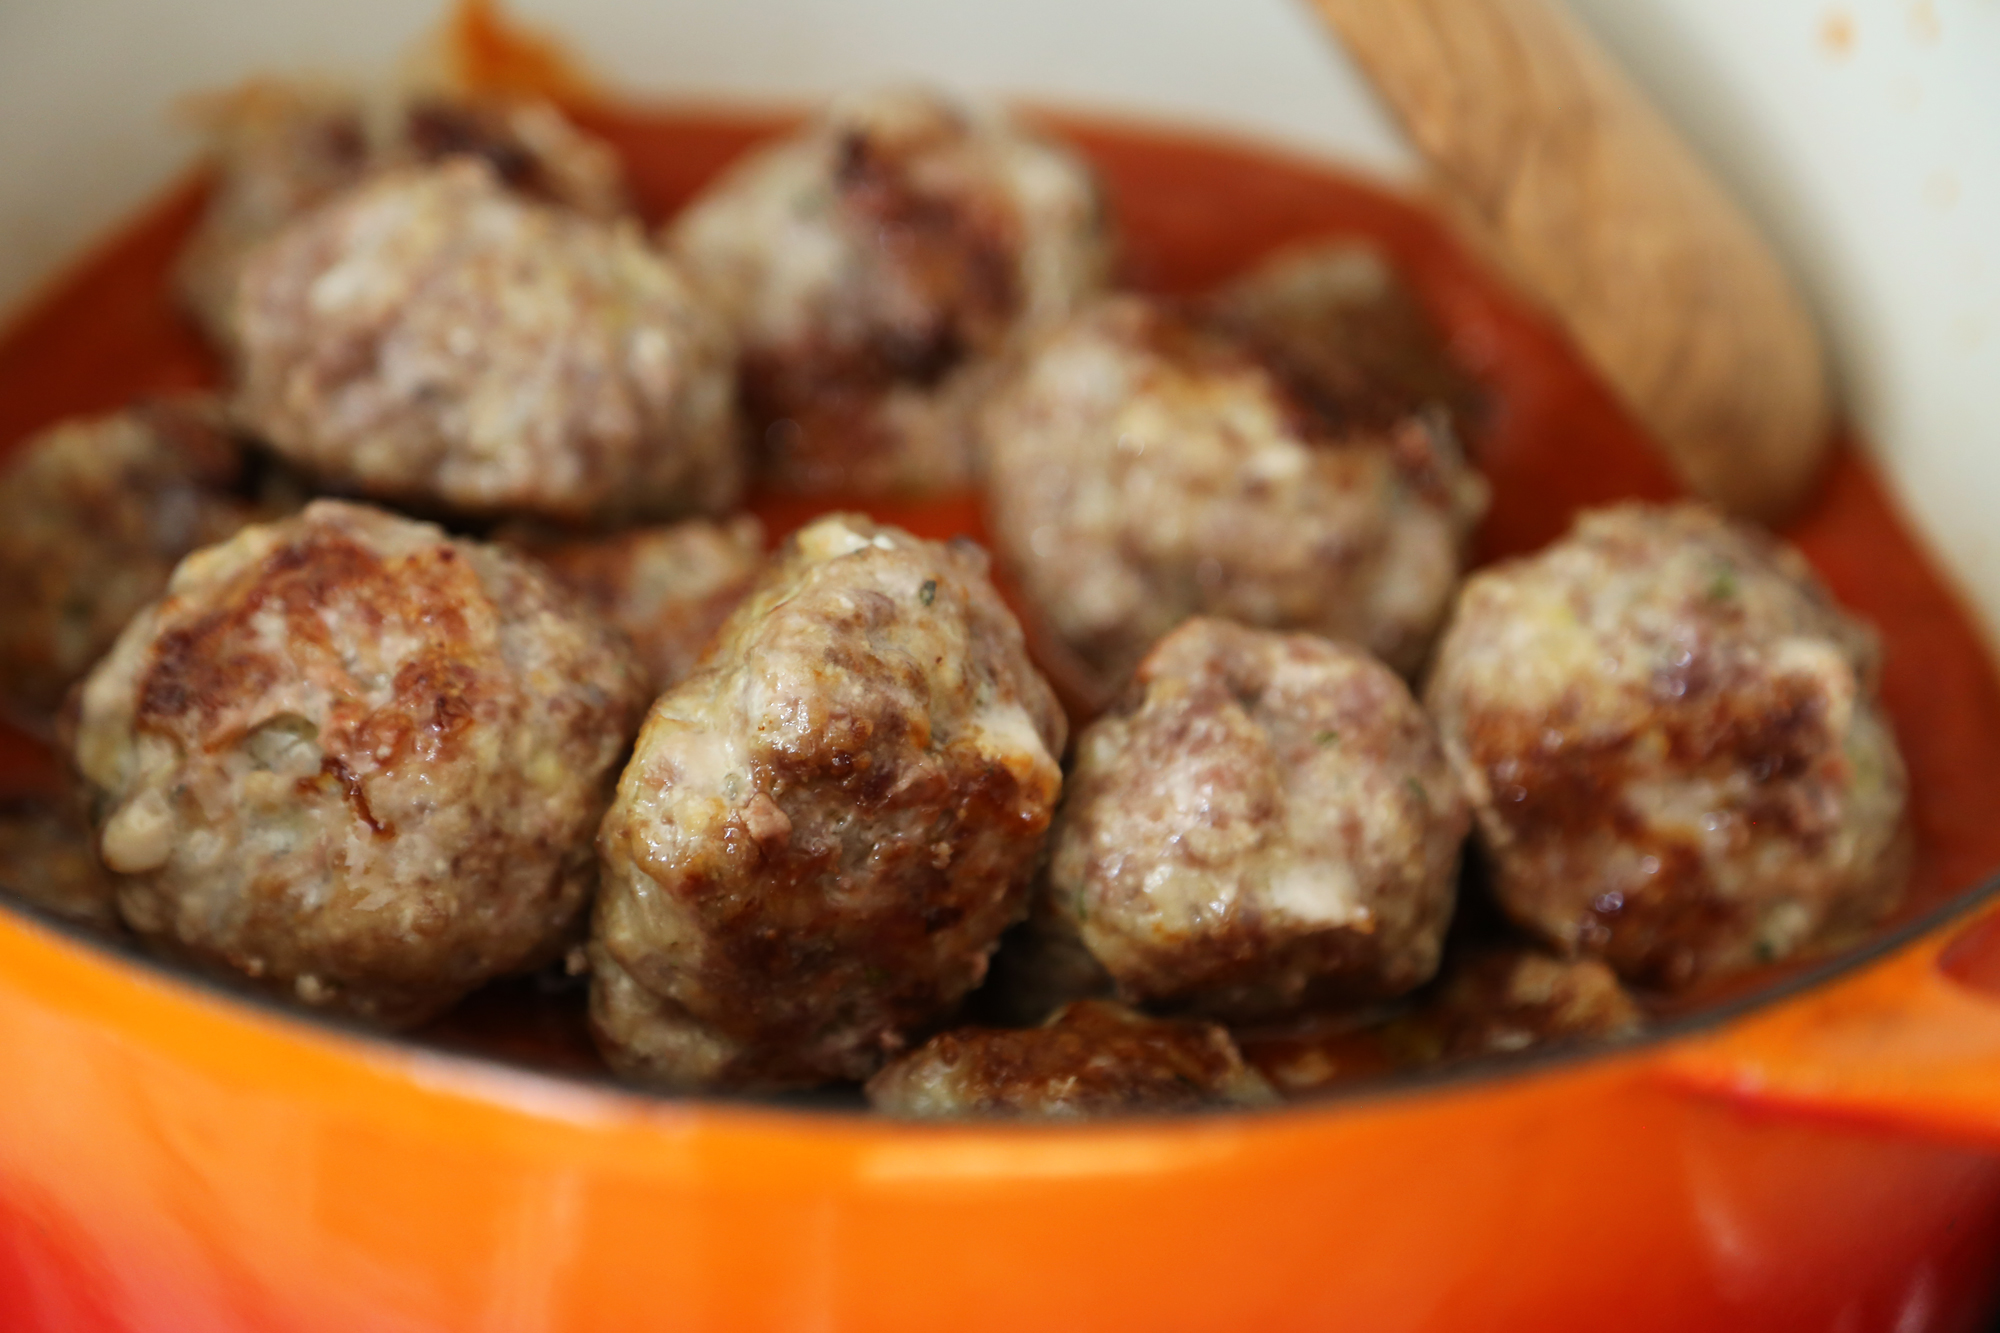 Add the meatballs to the sauce and simmer gently for about 30 minutes to an hour, until tender and the sauce is infused with the meat.